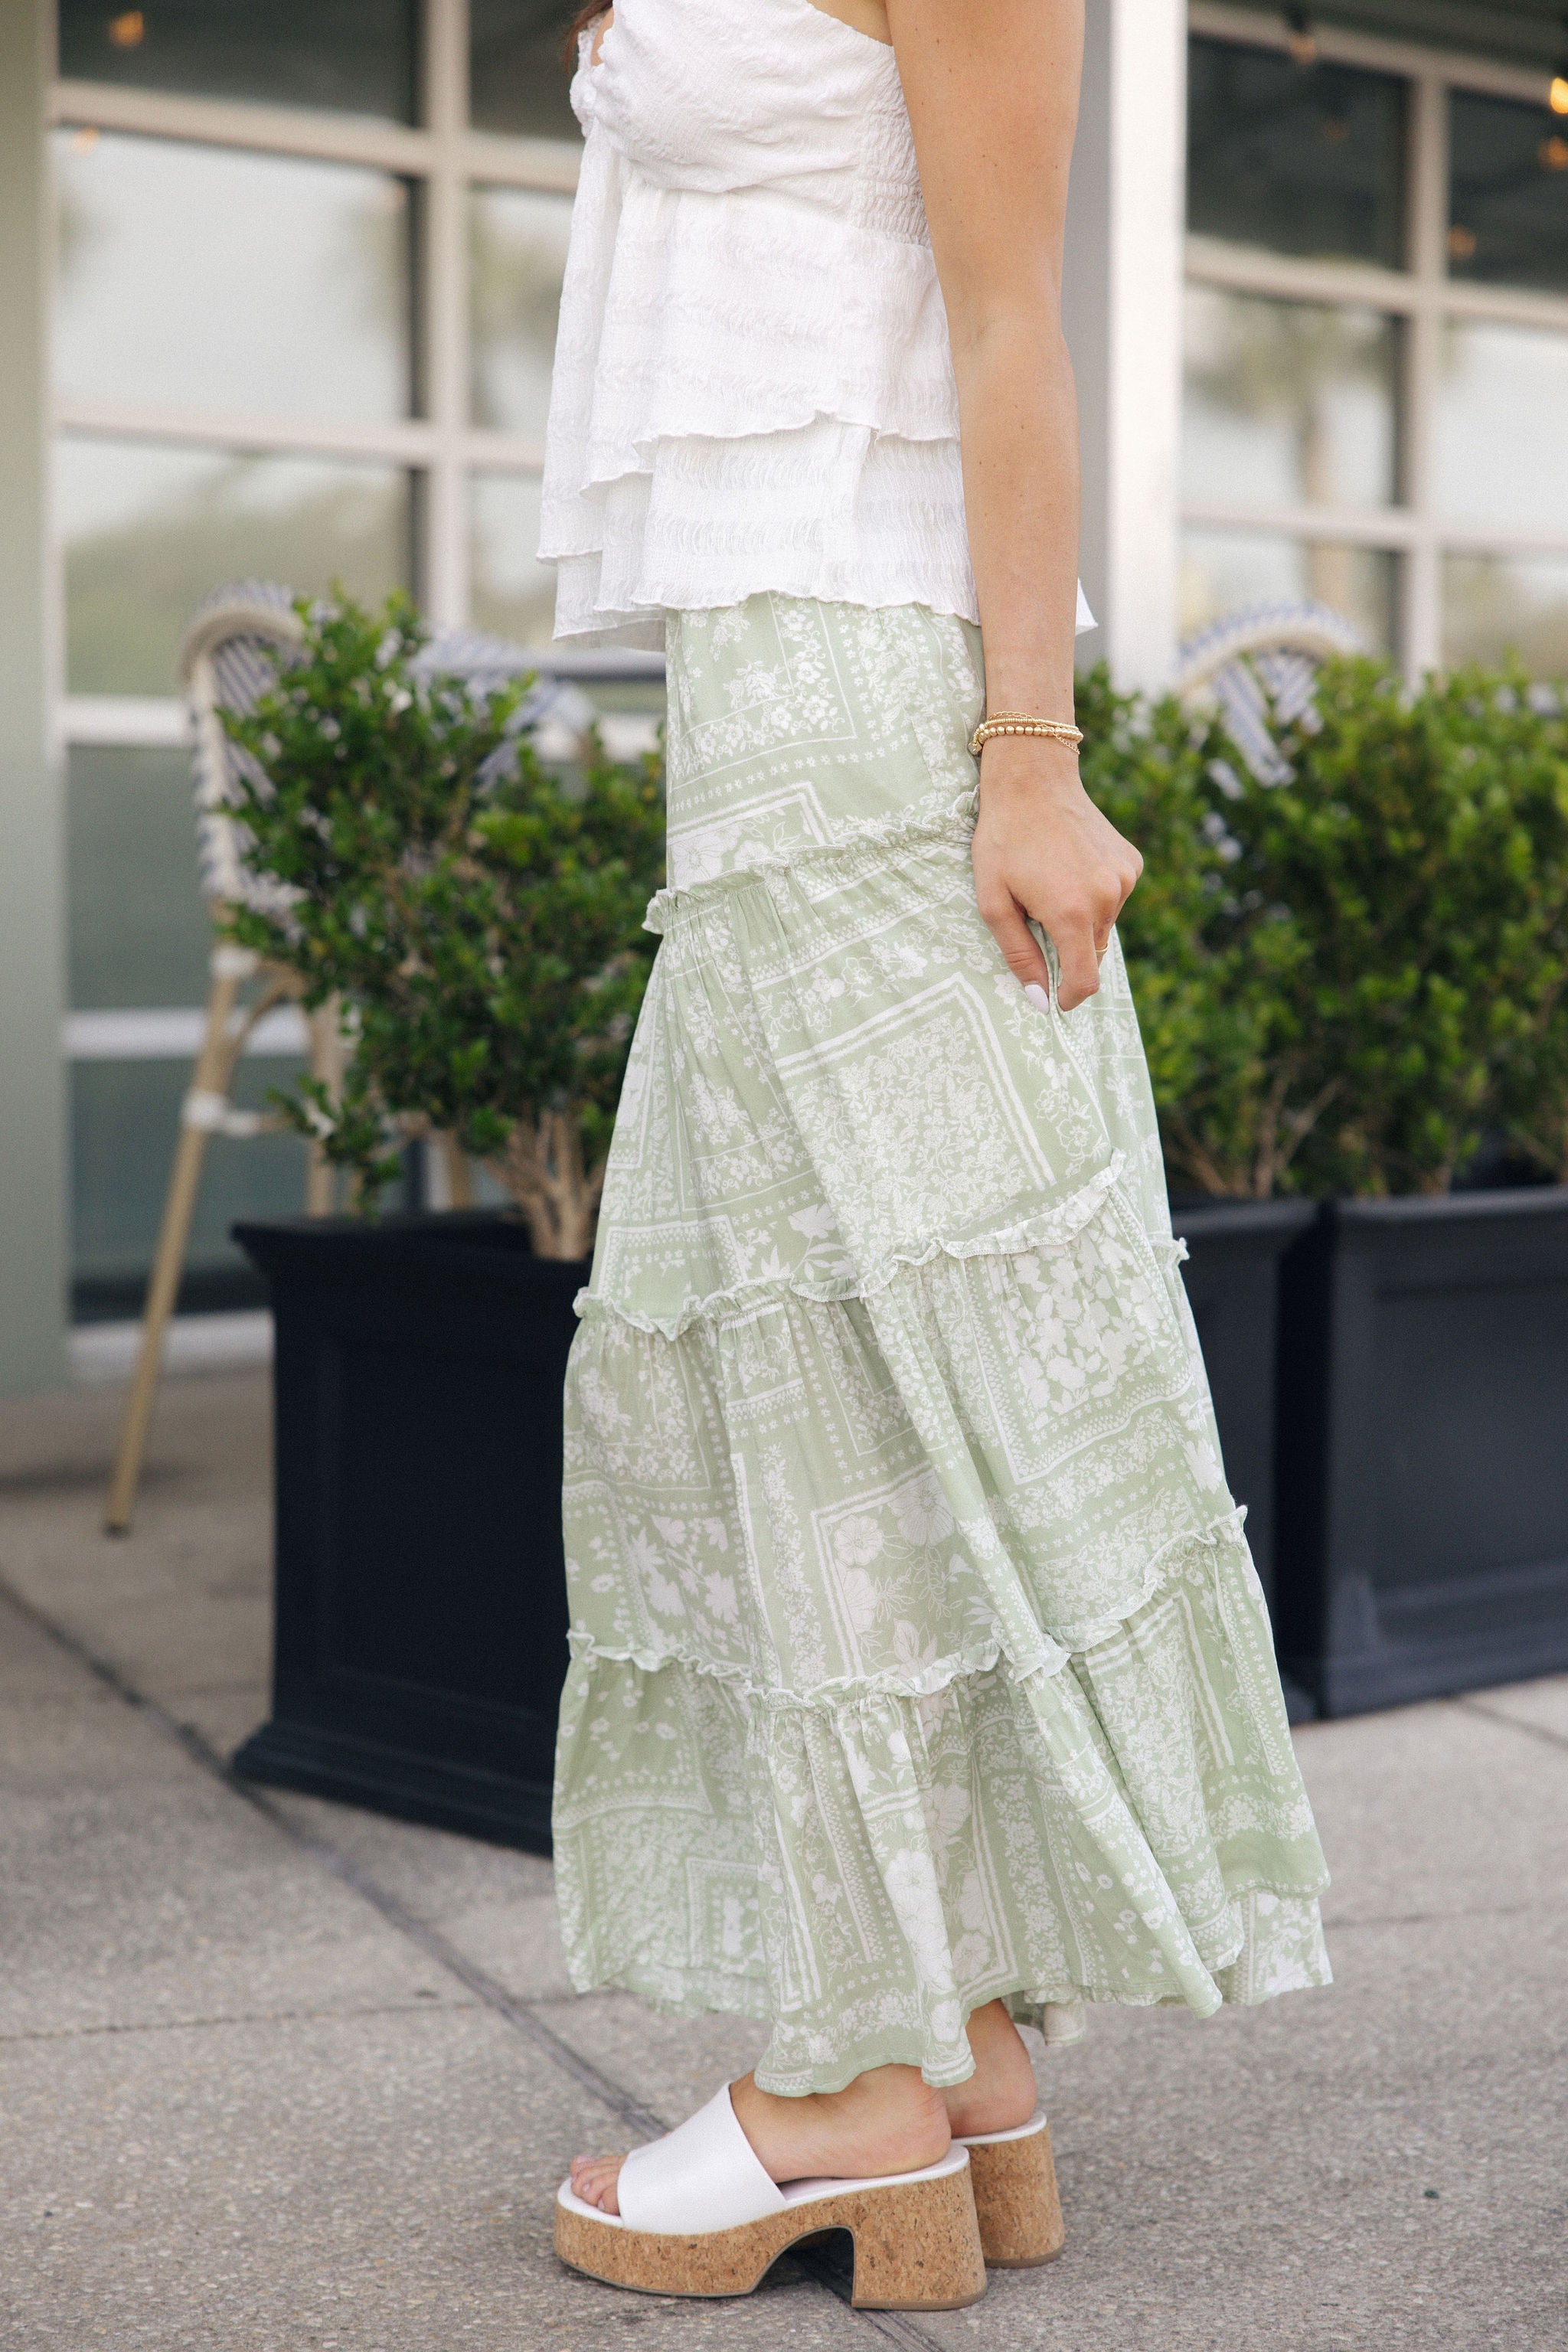 Full body side view of female model wearing the Yasmine Sage & White Floral Maxi Skirt that has sage fabric with a whtite floral patchwork pattern and tiered ruffle details. Paired with white tank top.